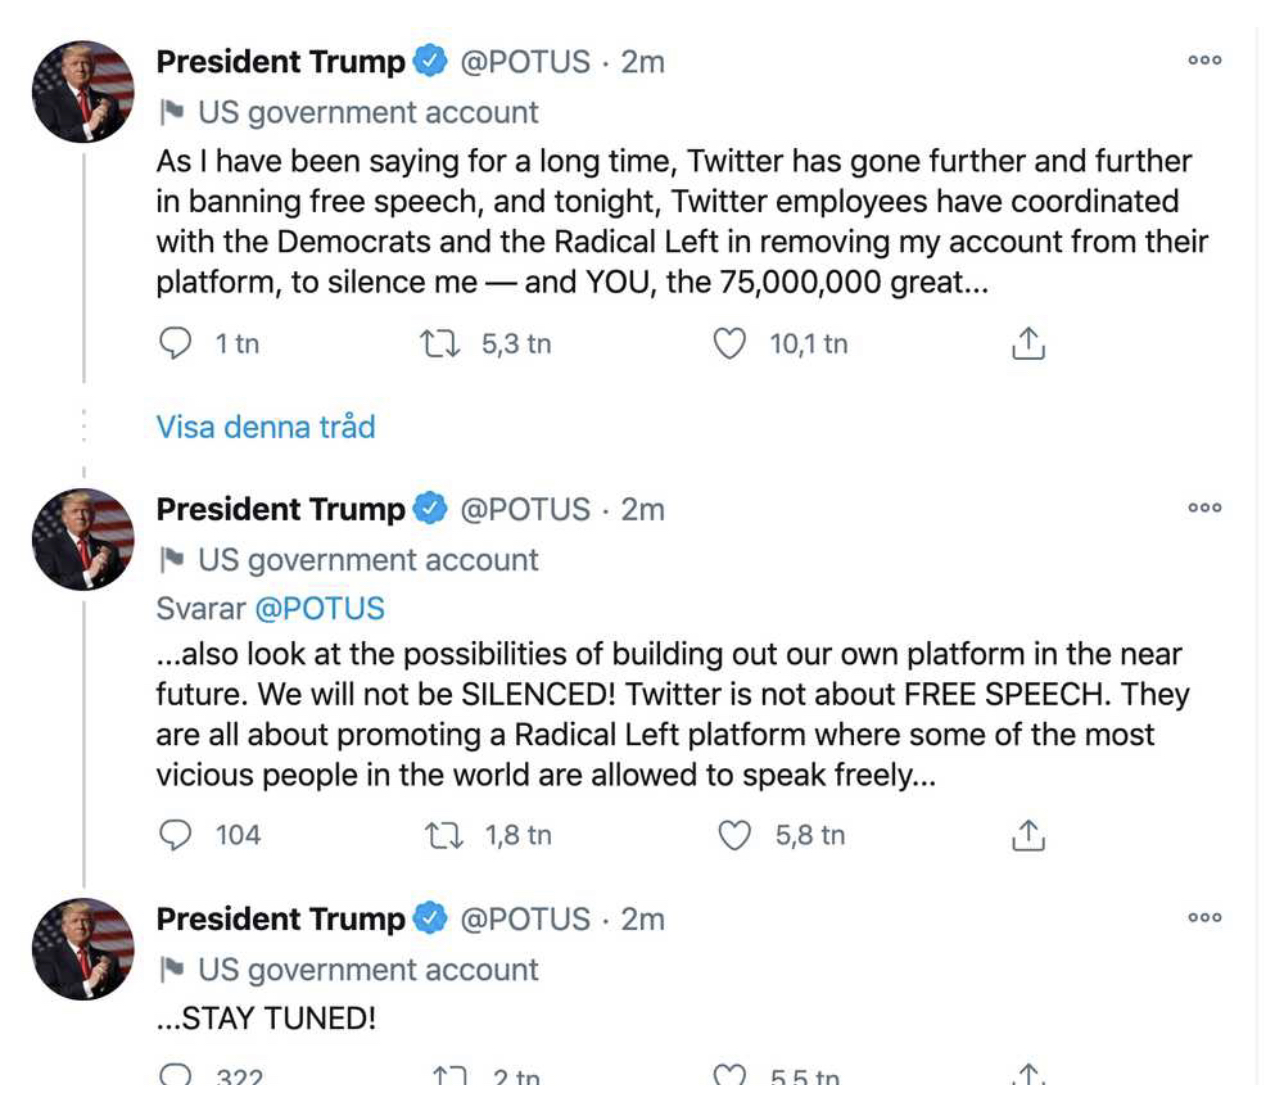 As I have been saying for a long time, Twitter has gone further and further in banning free speech, and tonight, Twitter employees have coordinated with the Democrats and the Radical Left in removing my account from their platform, to silence me — and YOU, the 75,000,000 great...  ...patriots who voted for me. Twitter may be a private company, but without the government’s gift of Section 230 they would not exist for long. I predicted this would happen. We have been negotiating with various other sites, and will have a big announcement soon, while we...  ...also look at the possibilities of building out our own platform in the near future. We will not be SILENCED! Twitter is not about FREE SPEECH. They are all about promoting a Radical Left platform where some of the most vicious people in the world are allowed to speak freely...